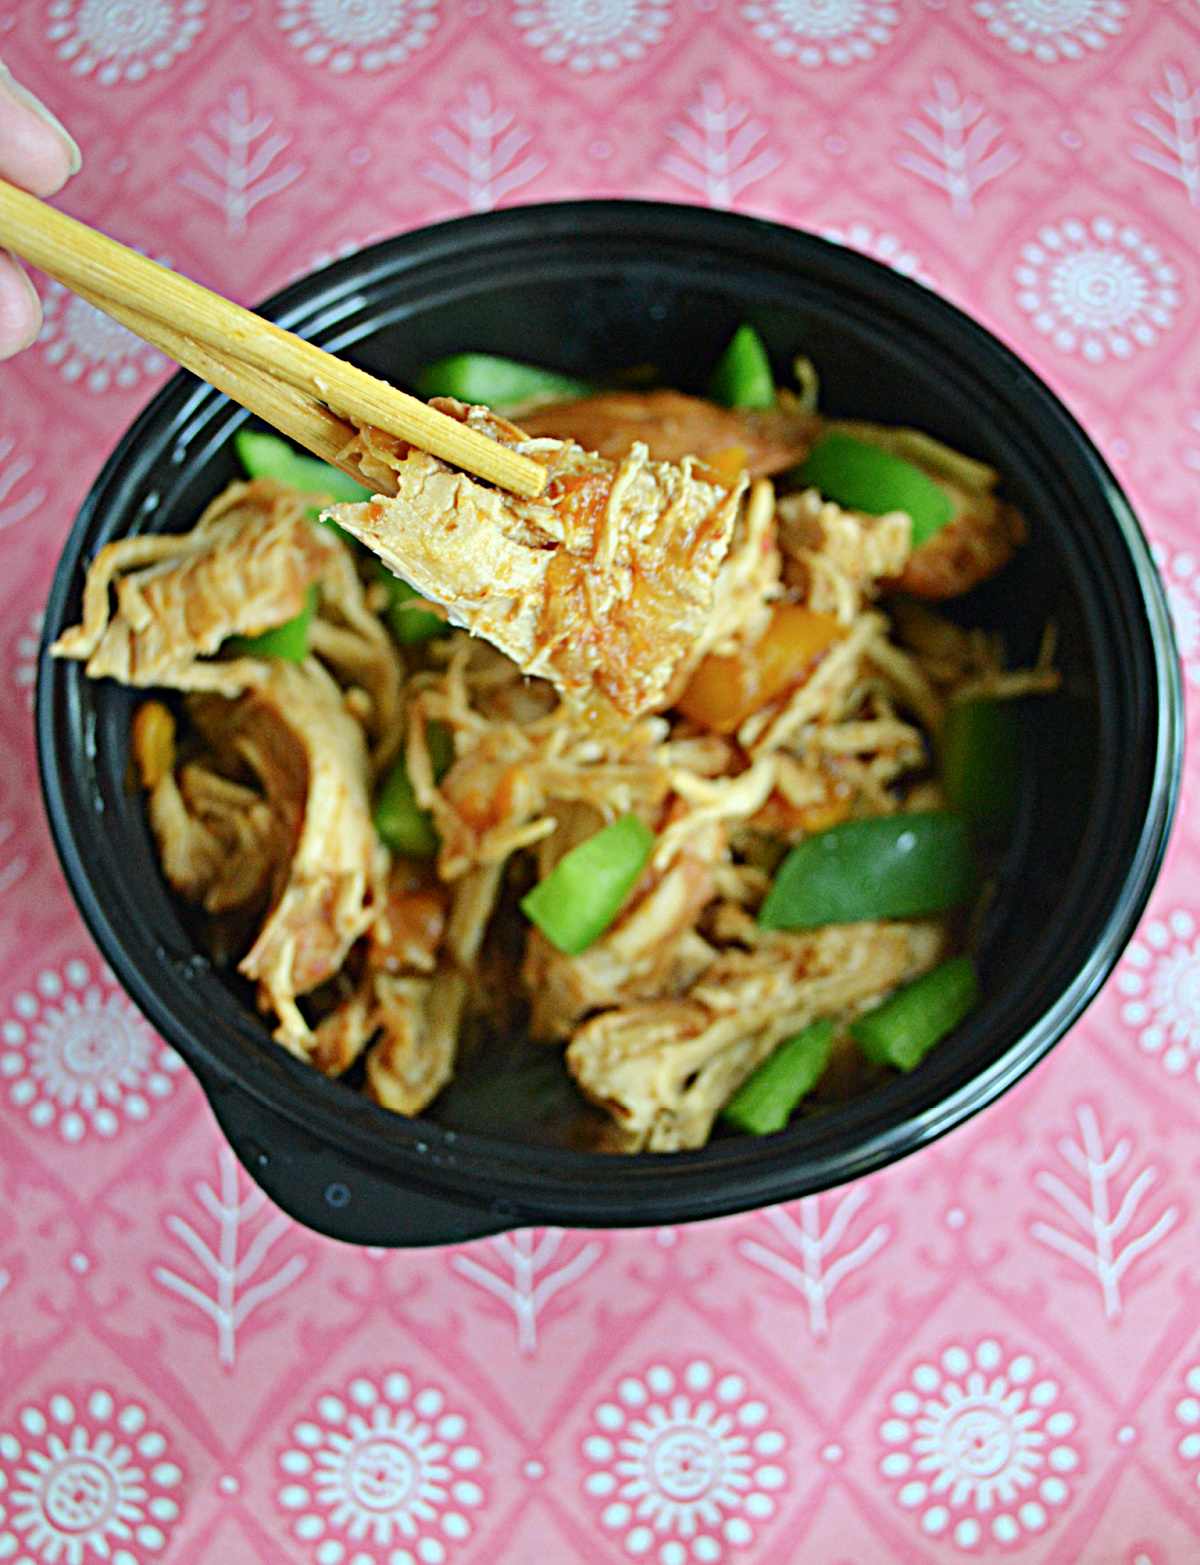 A close up view of bourbon chicken being held up by chopsticks.